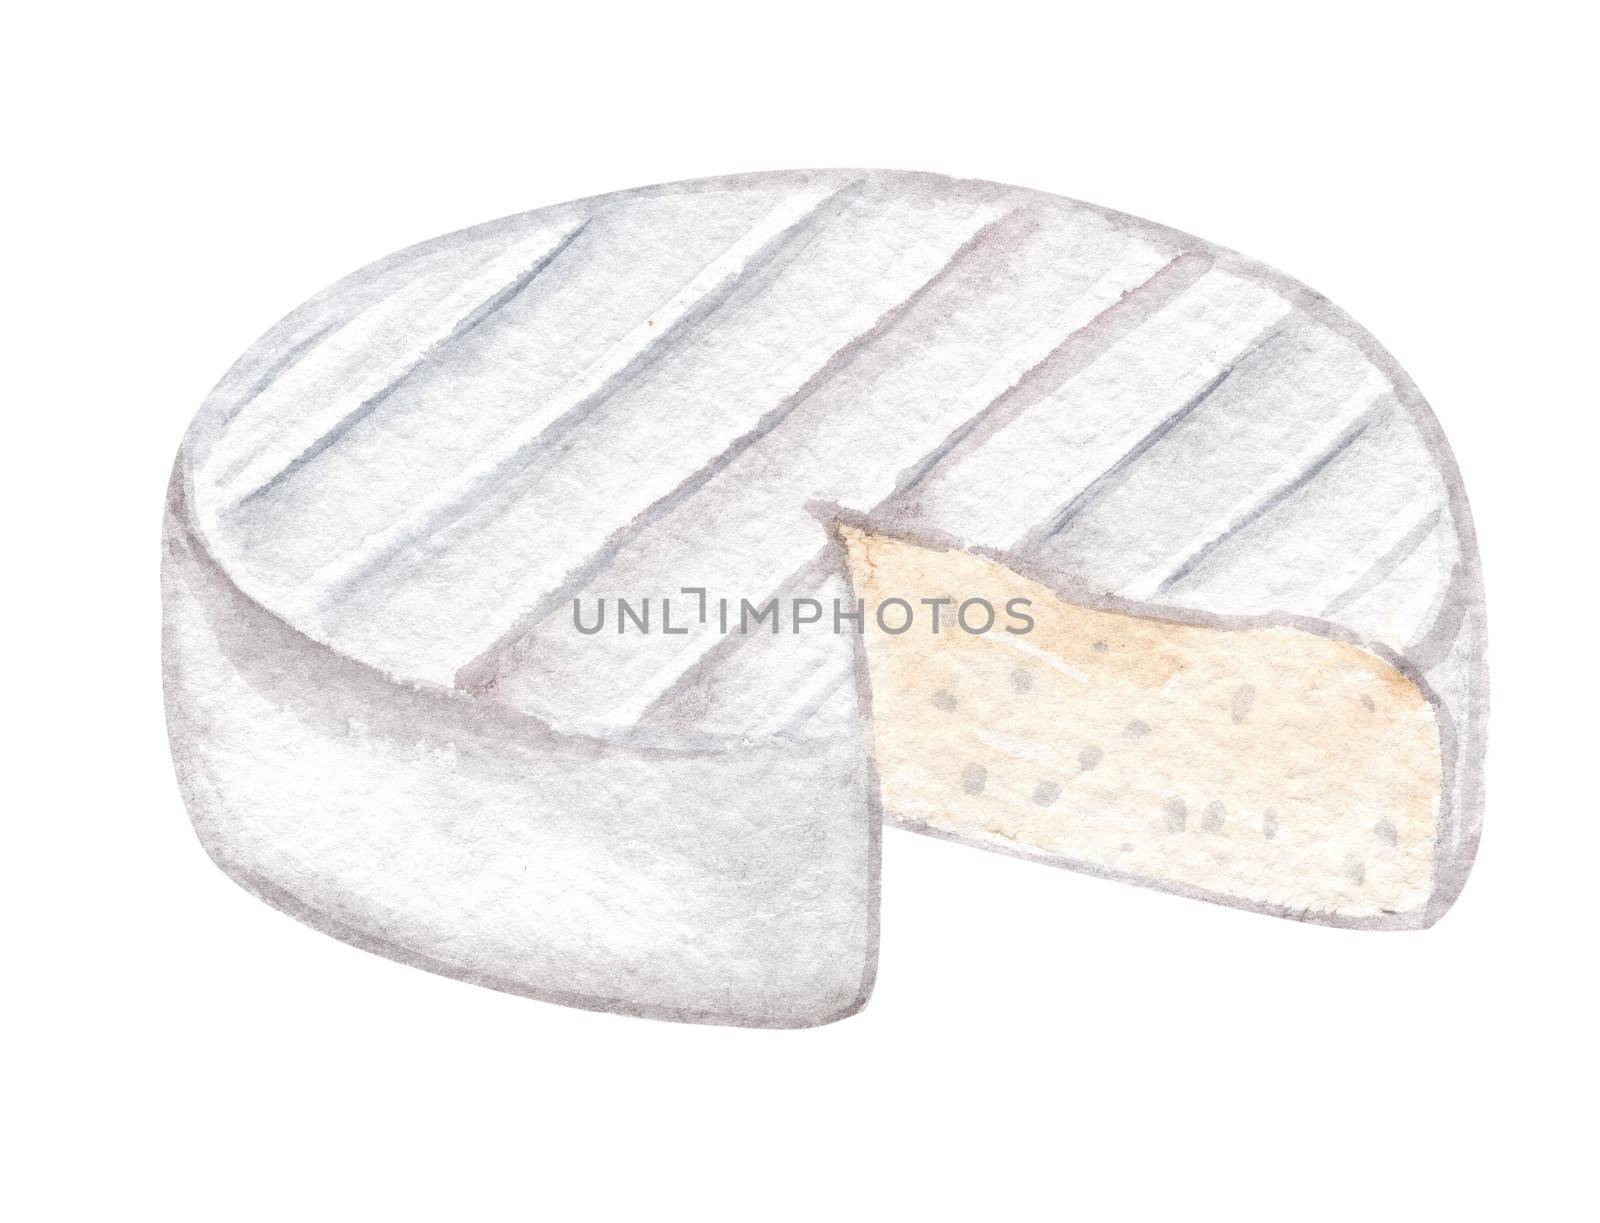 Watercolor white cheese with mold isolated on white . Camembert wheel hand drawn illustration. Brie art by dreamloud